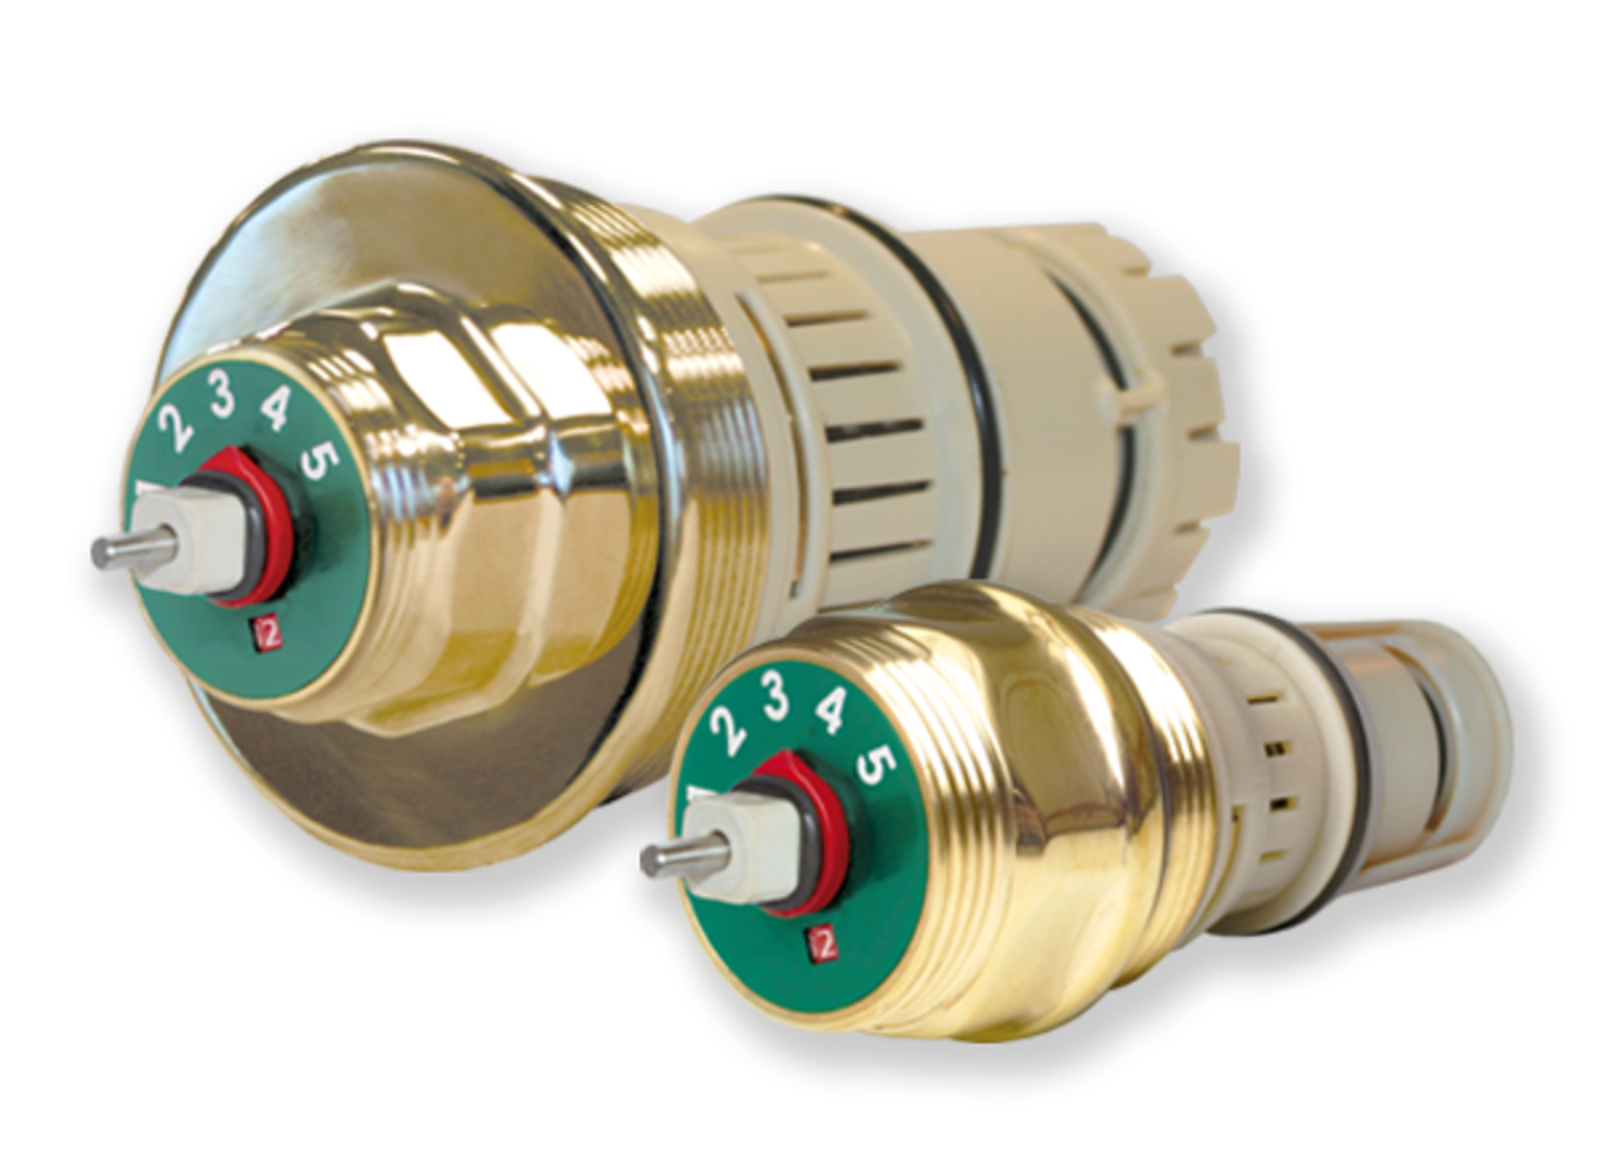 FlowCon Green Inserts for FlowCon valves, Pressure Independent Control valves, HVAC